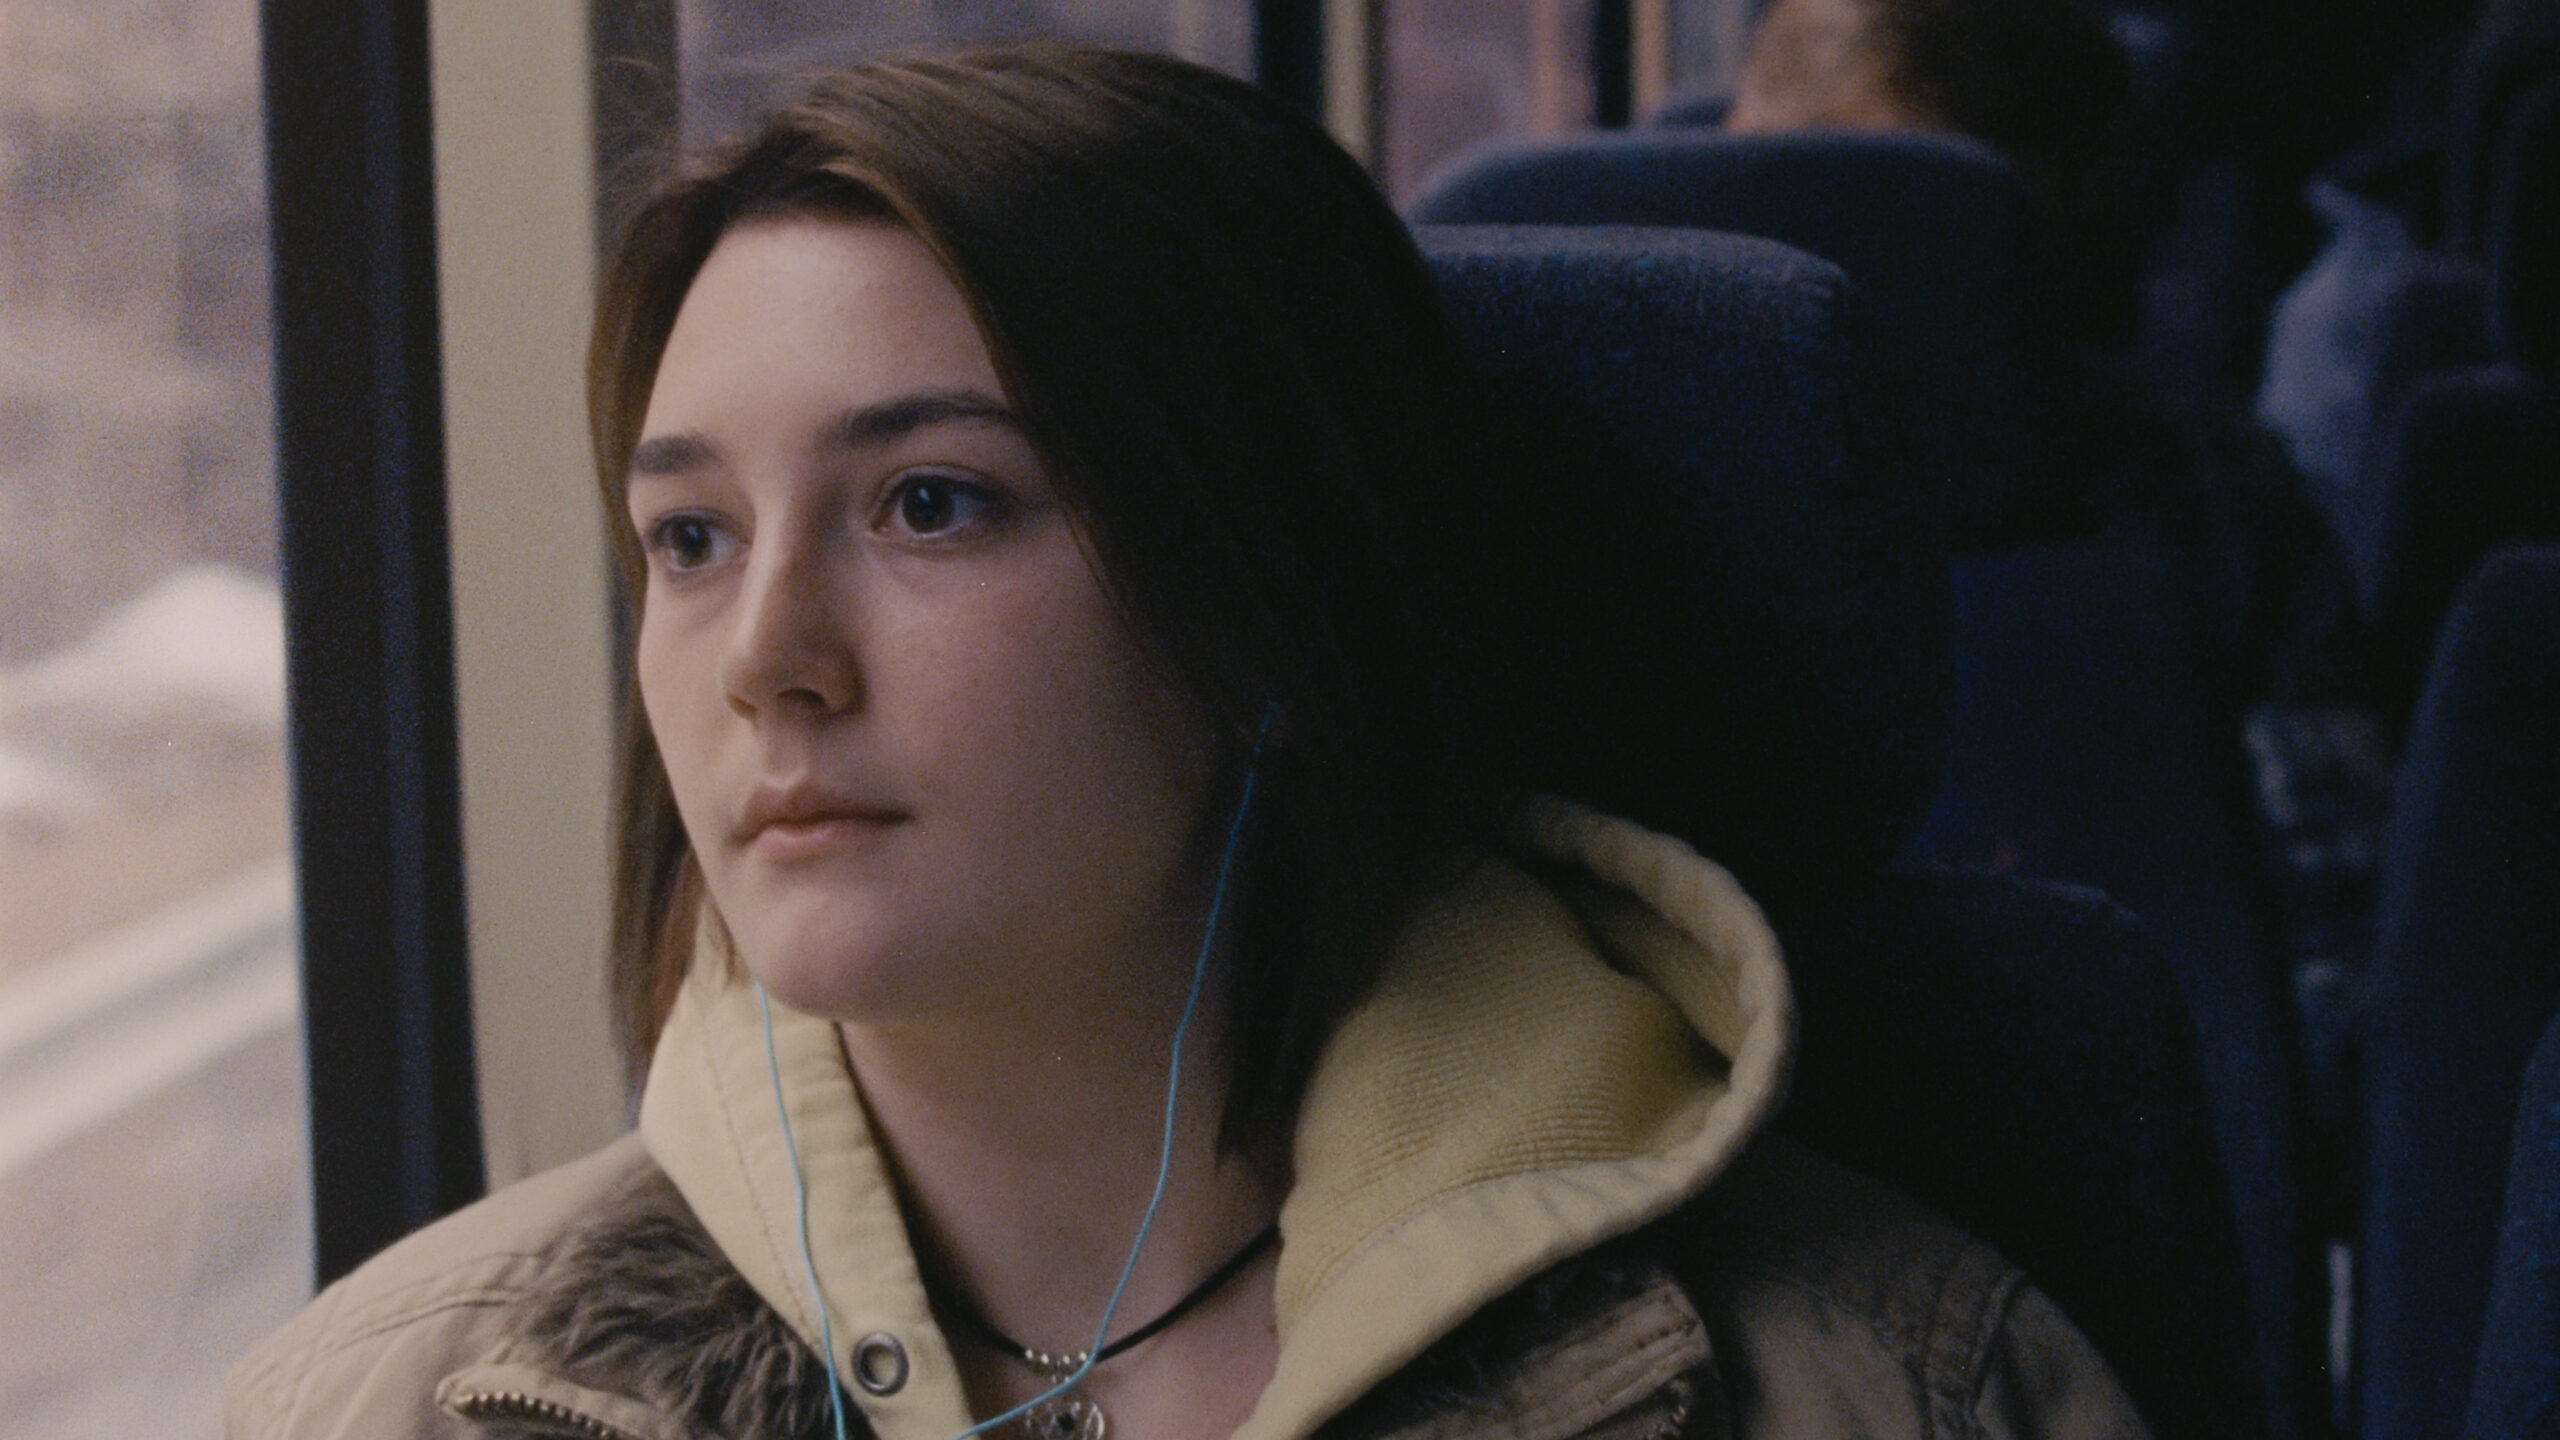 Sidney Flanigan stars as 17-year-old Autumn in <em>Never Rarely Sometimes Always. </em>